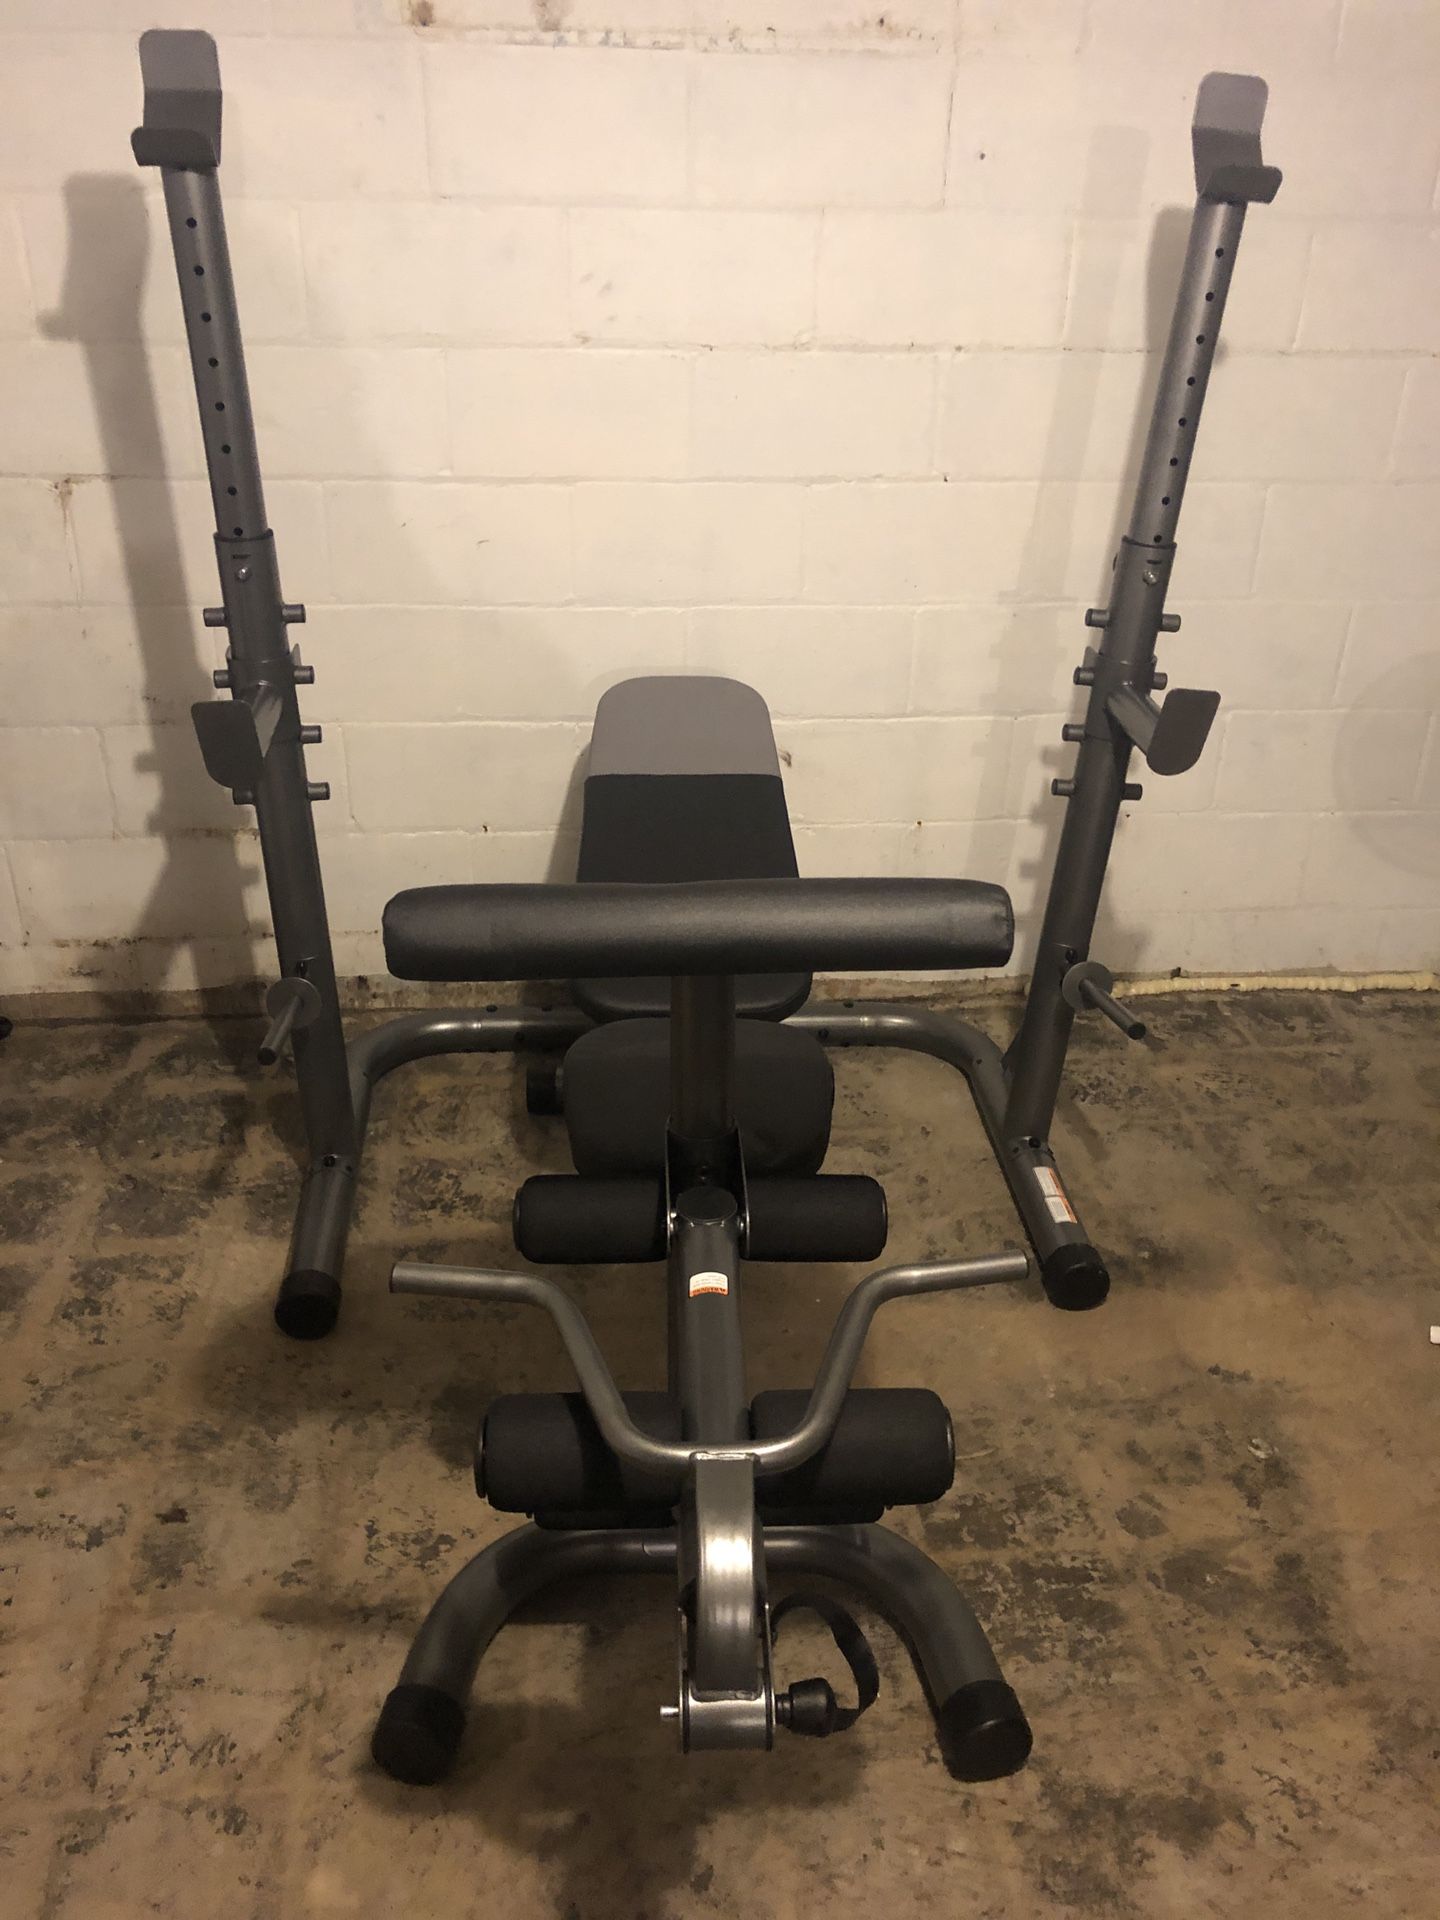 Weider Olympic Workout Bench with Squat Rack